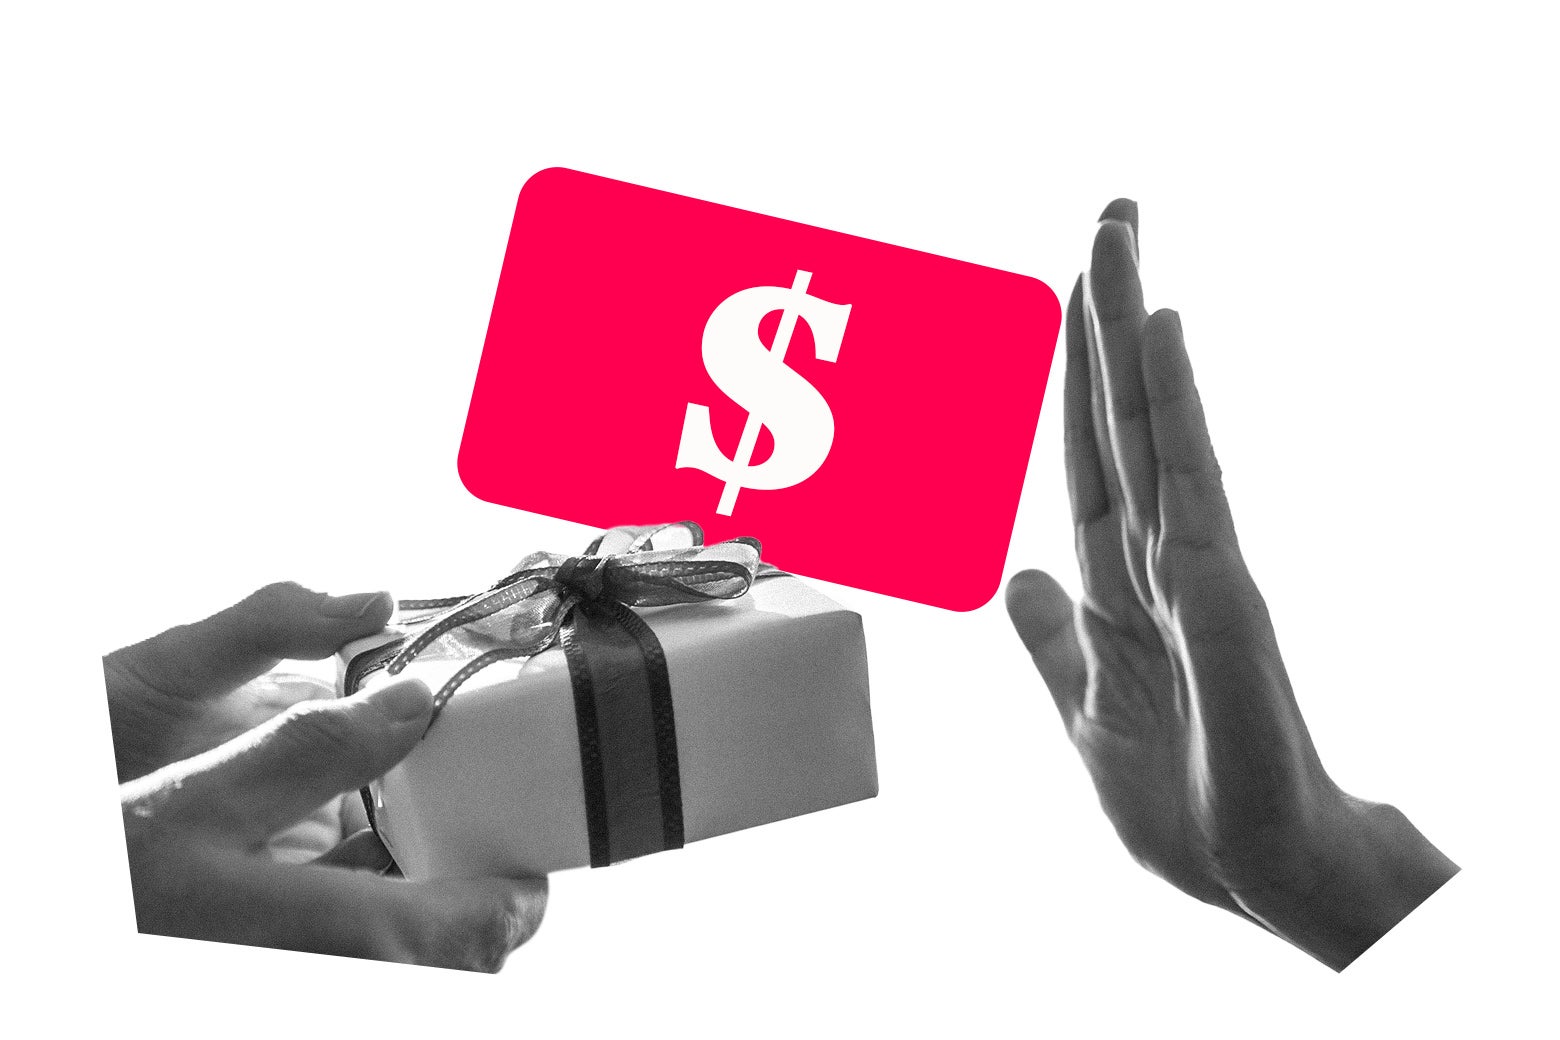 Can I be Taxed for Gifting My Business?